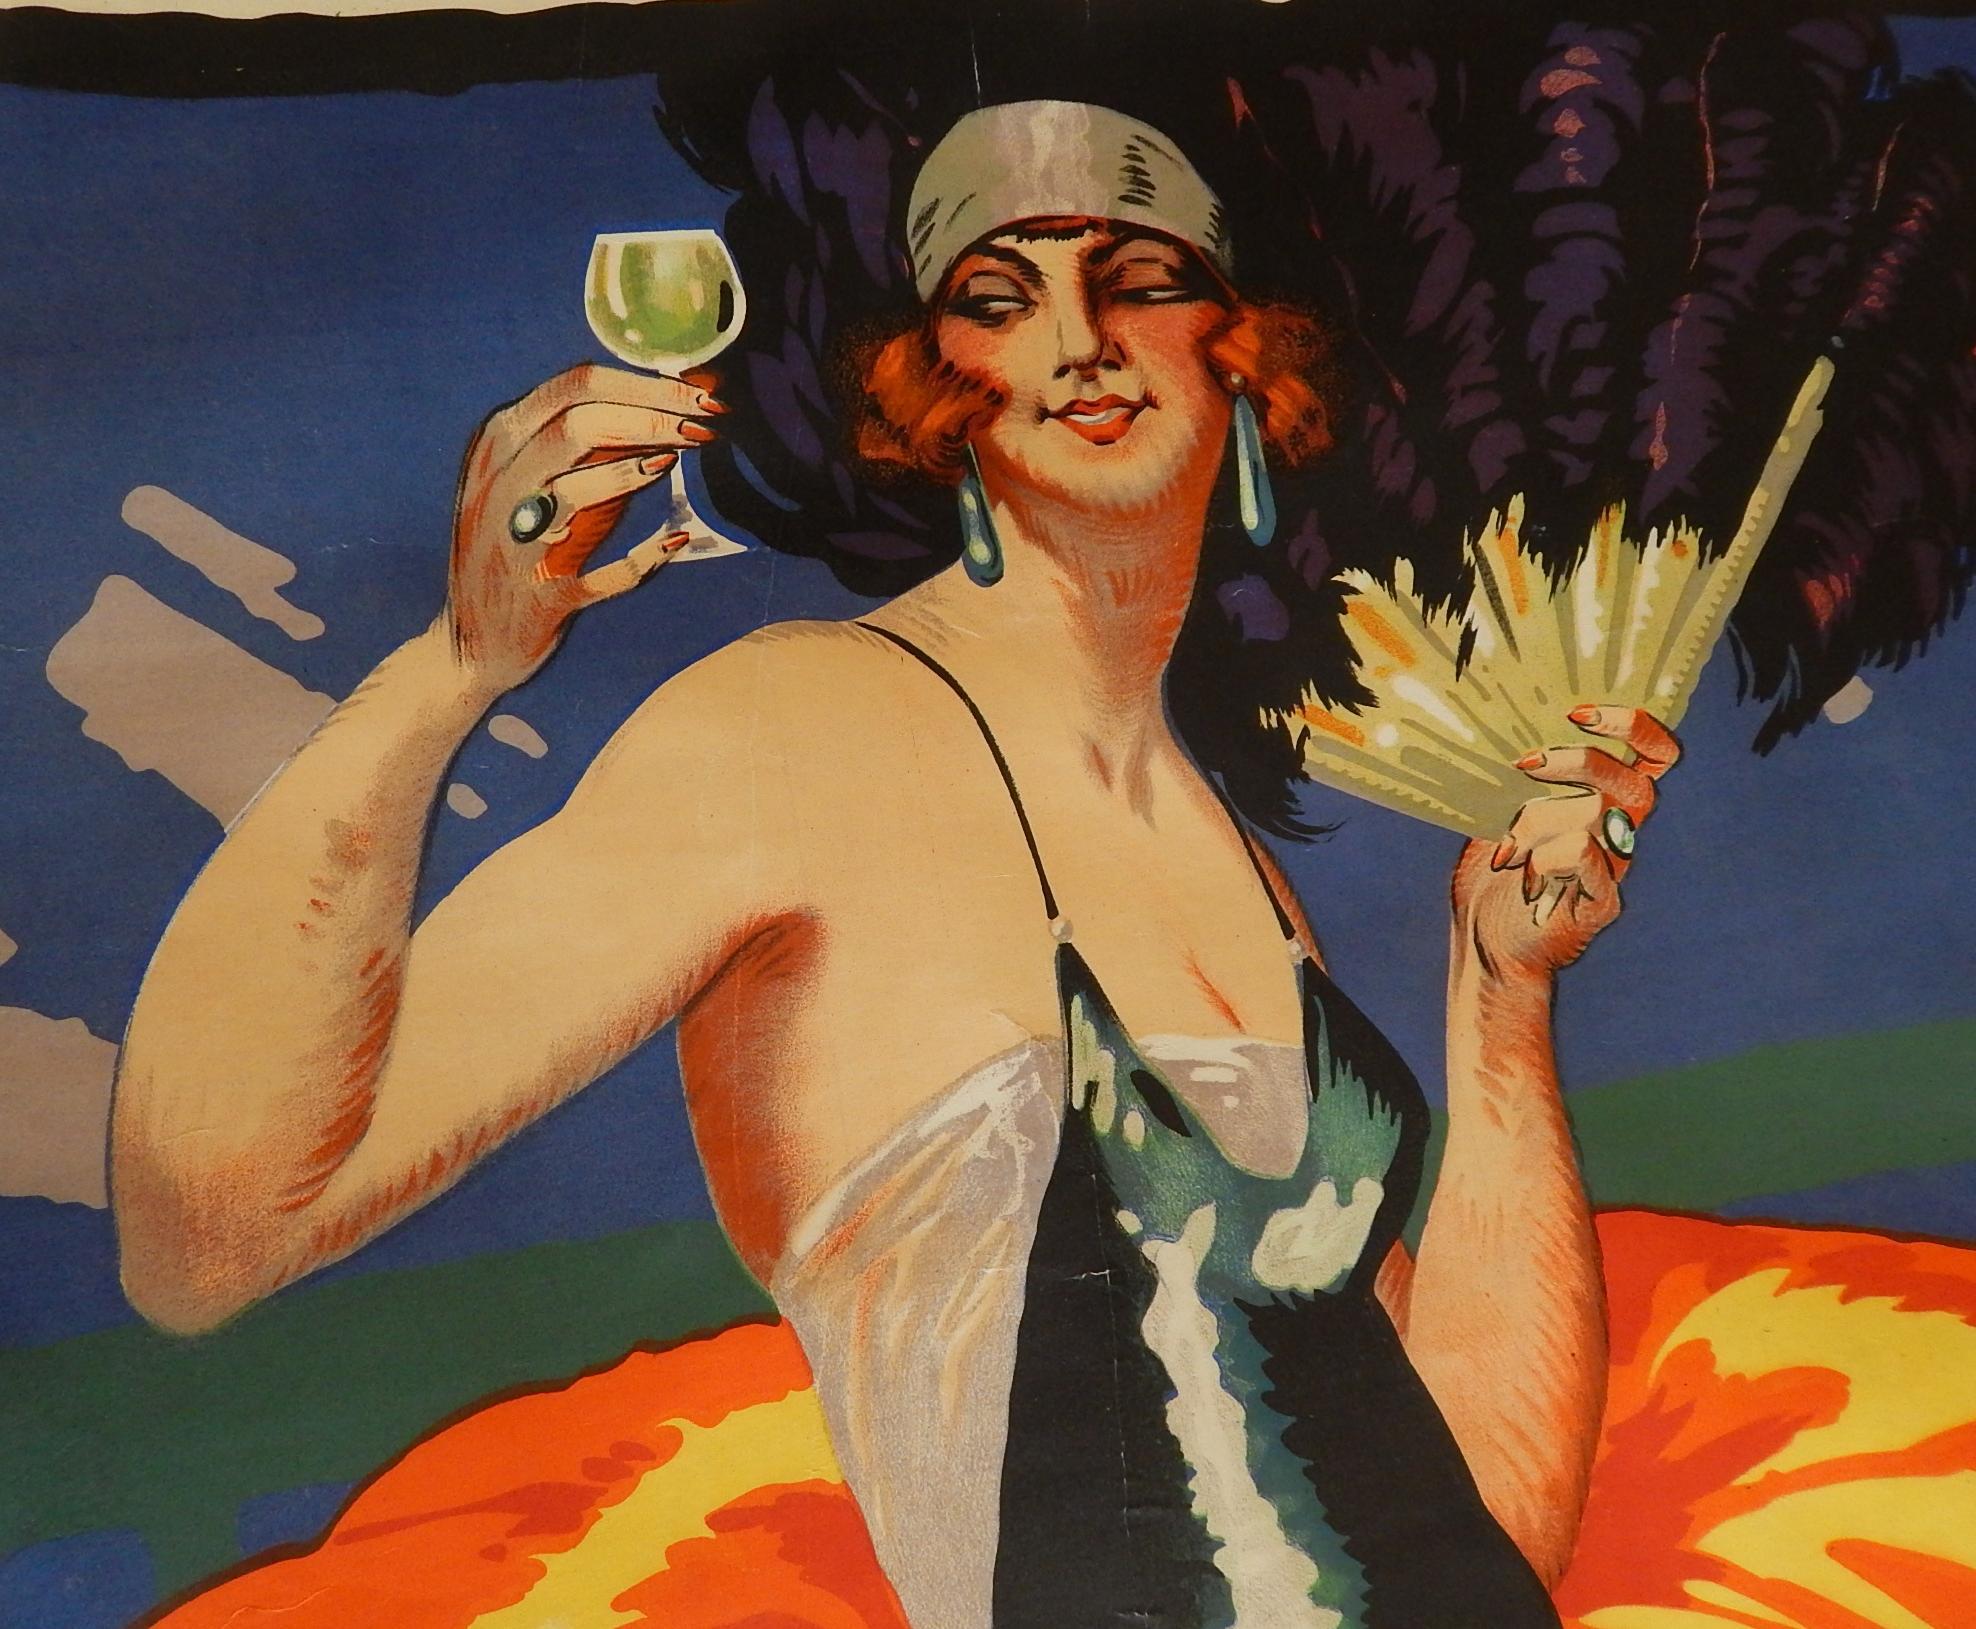 Original, classic, Art Deco vintage alcohol advertising poster designed by Delval for Fap Anis, a French liquor drink made from anise. The ad features Gaby Deslys, a popular actress, flapper, and singer who became famous in 1910 because of her